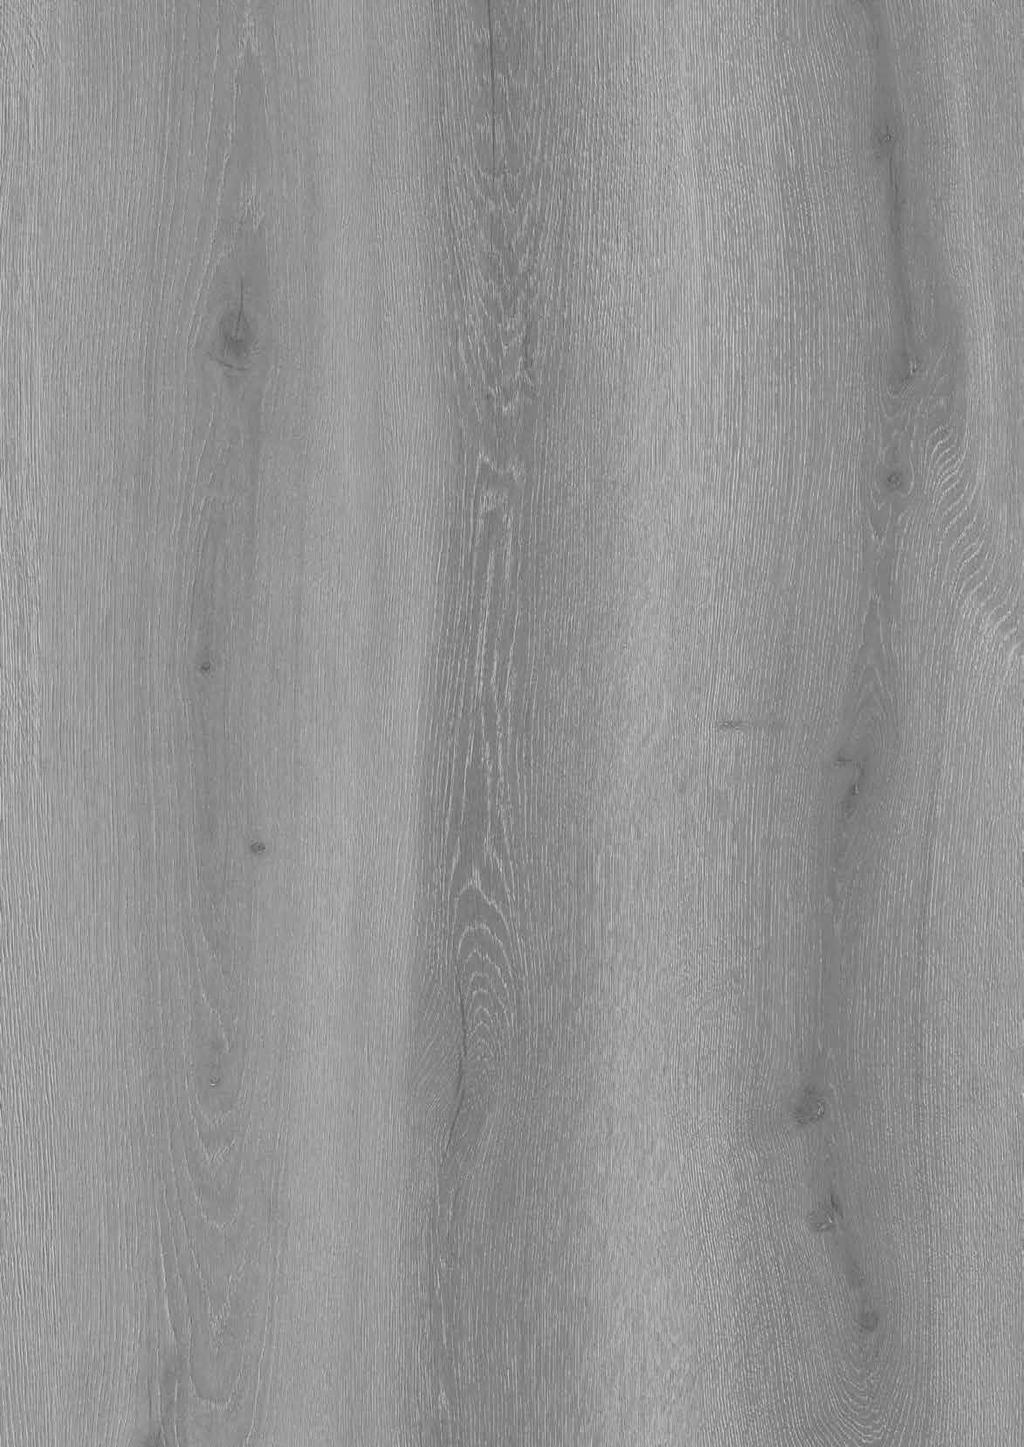 FOREST OAK SOFTLY REFINED A patinaed oak, brushed and cerused,